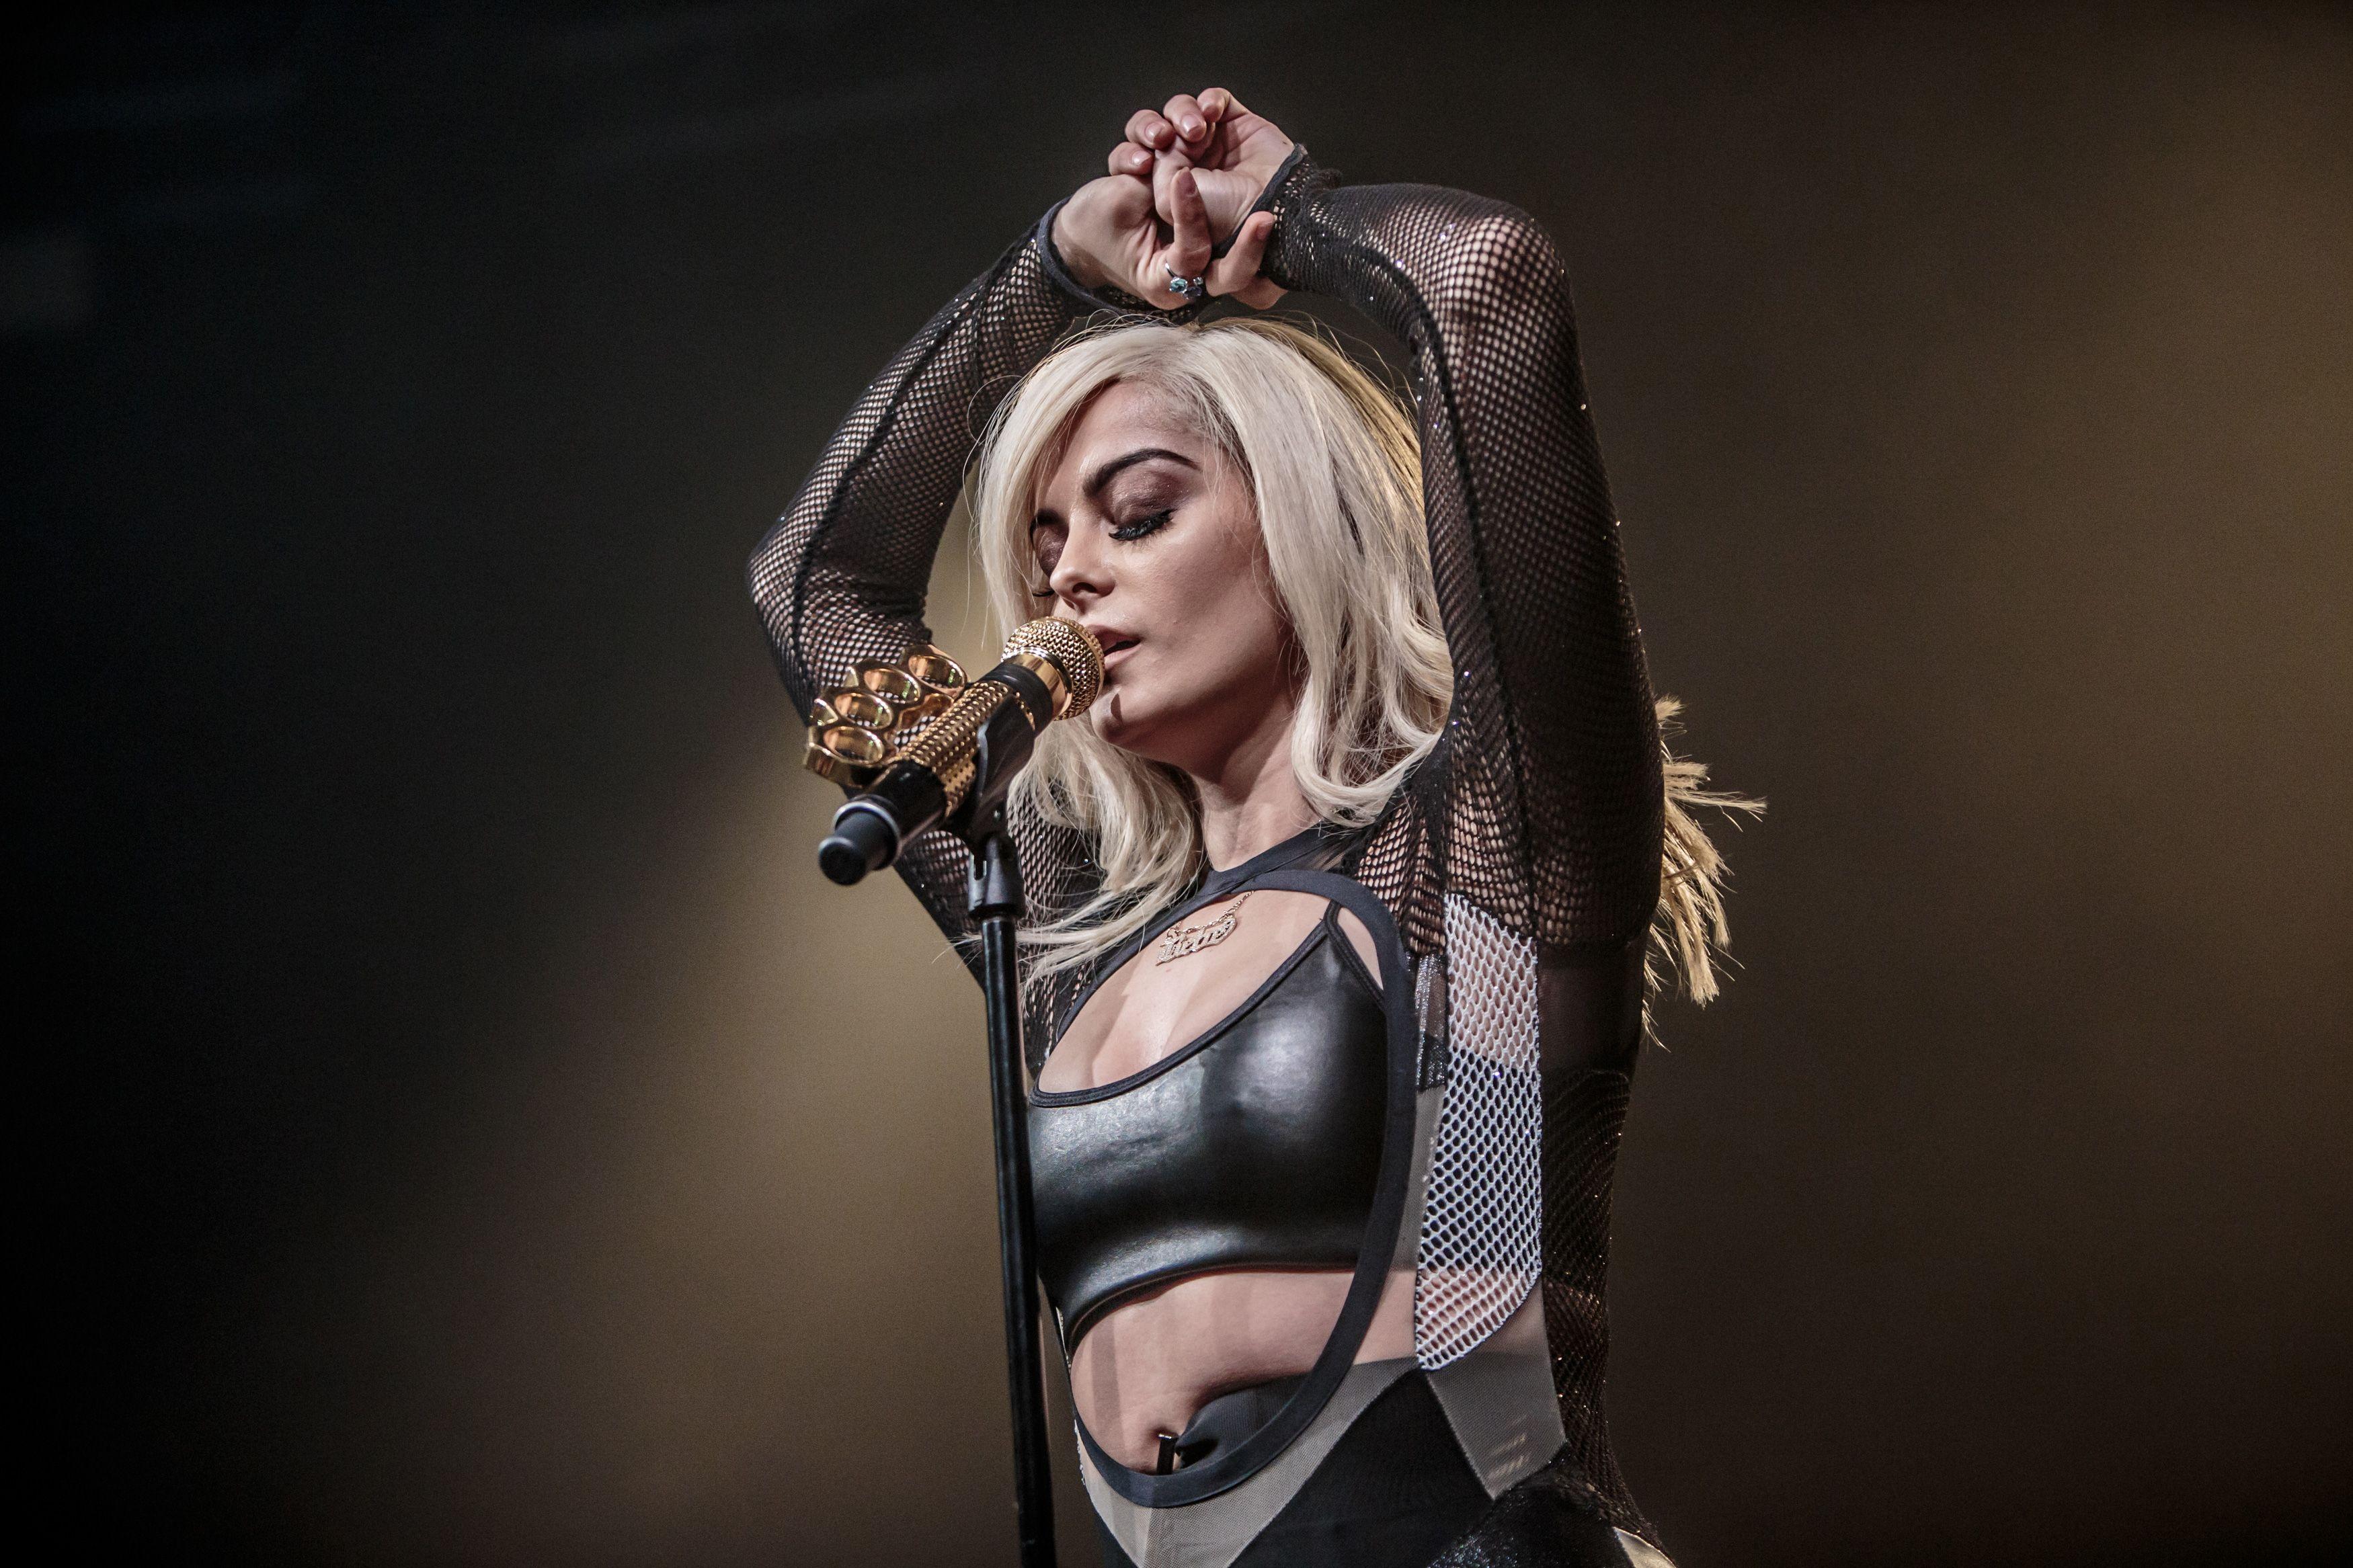 Bebe Rexha Performing Wallpaper Background 62553 3500x2333 px